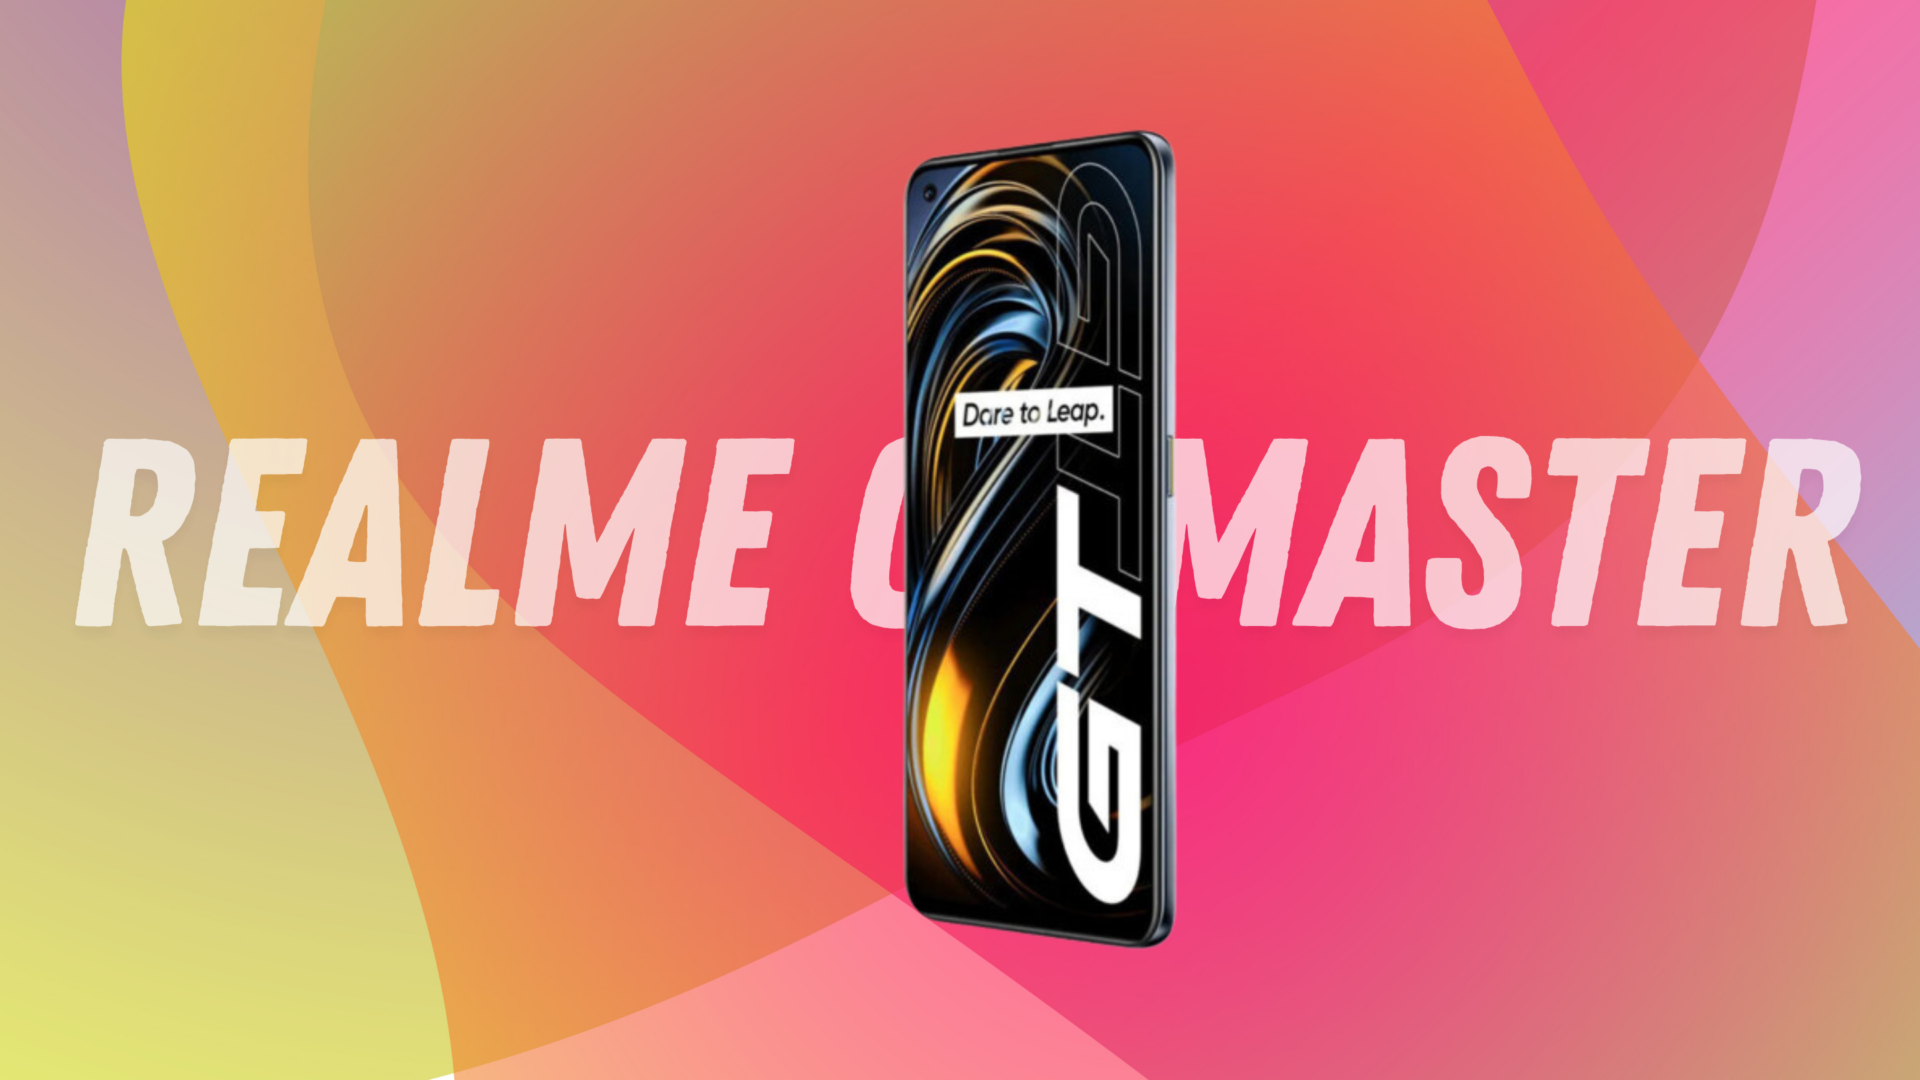 Realme GT Master Series announced with Snapdragon 870 5G SoC, 65W fast charging tech